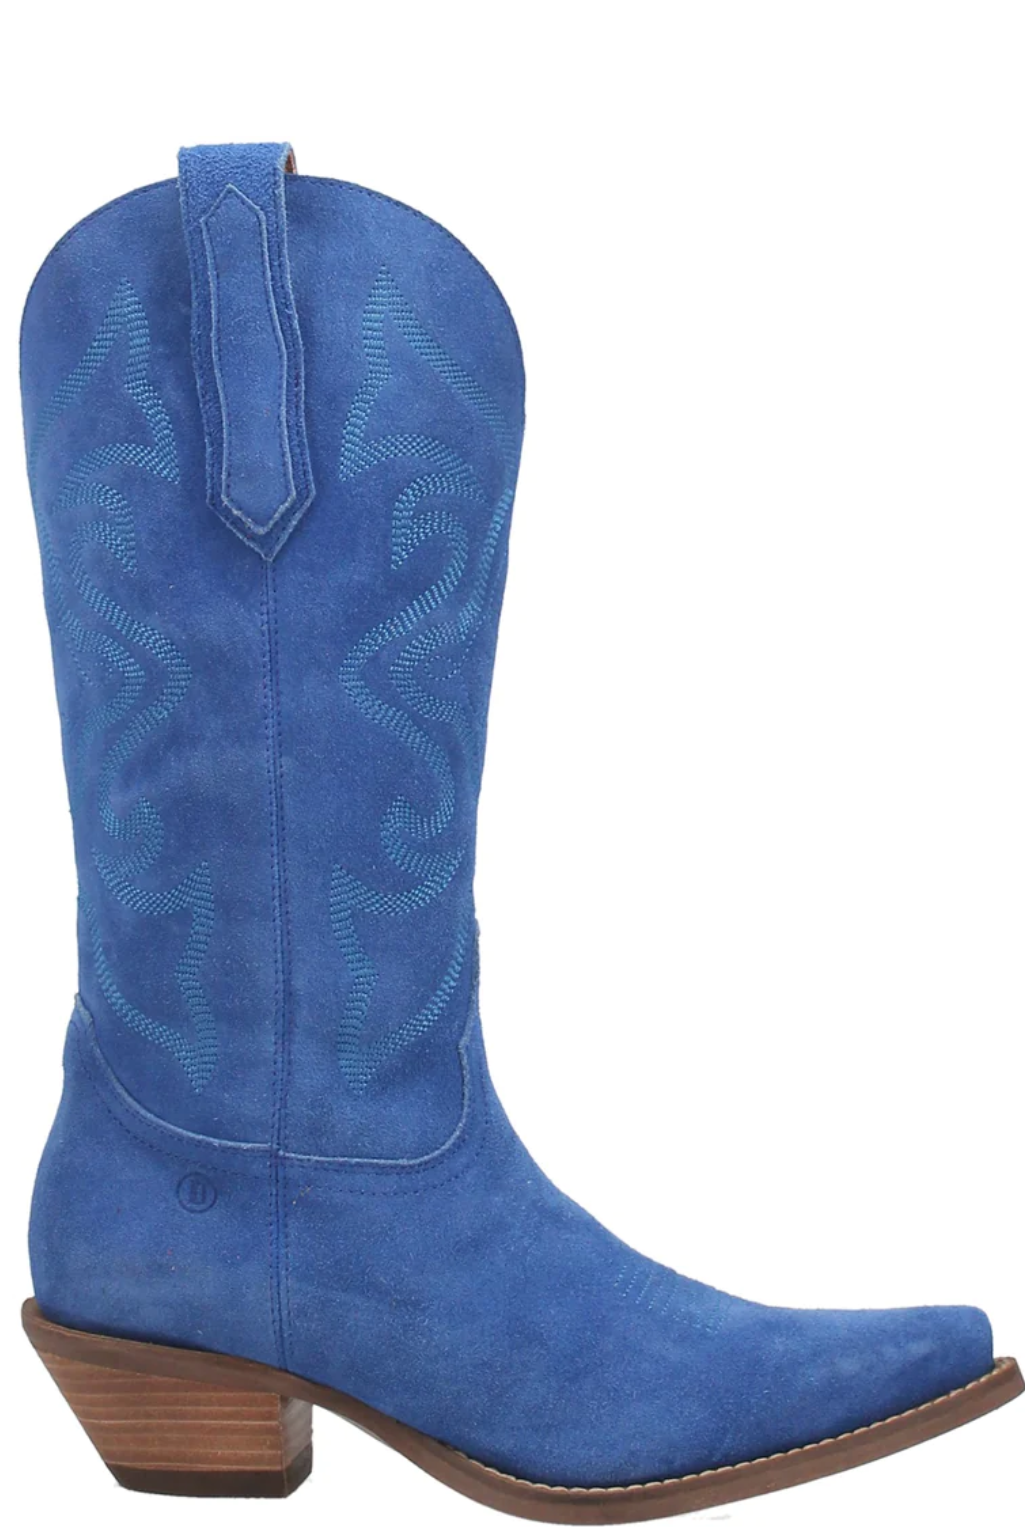 Out West Boot - Blue